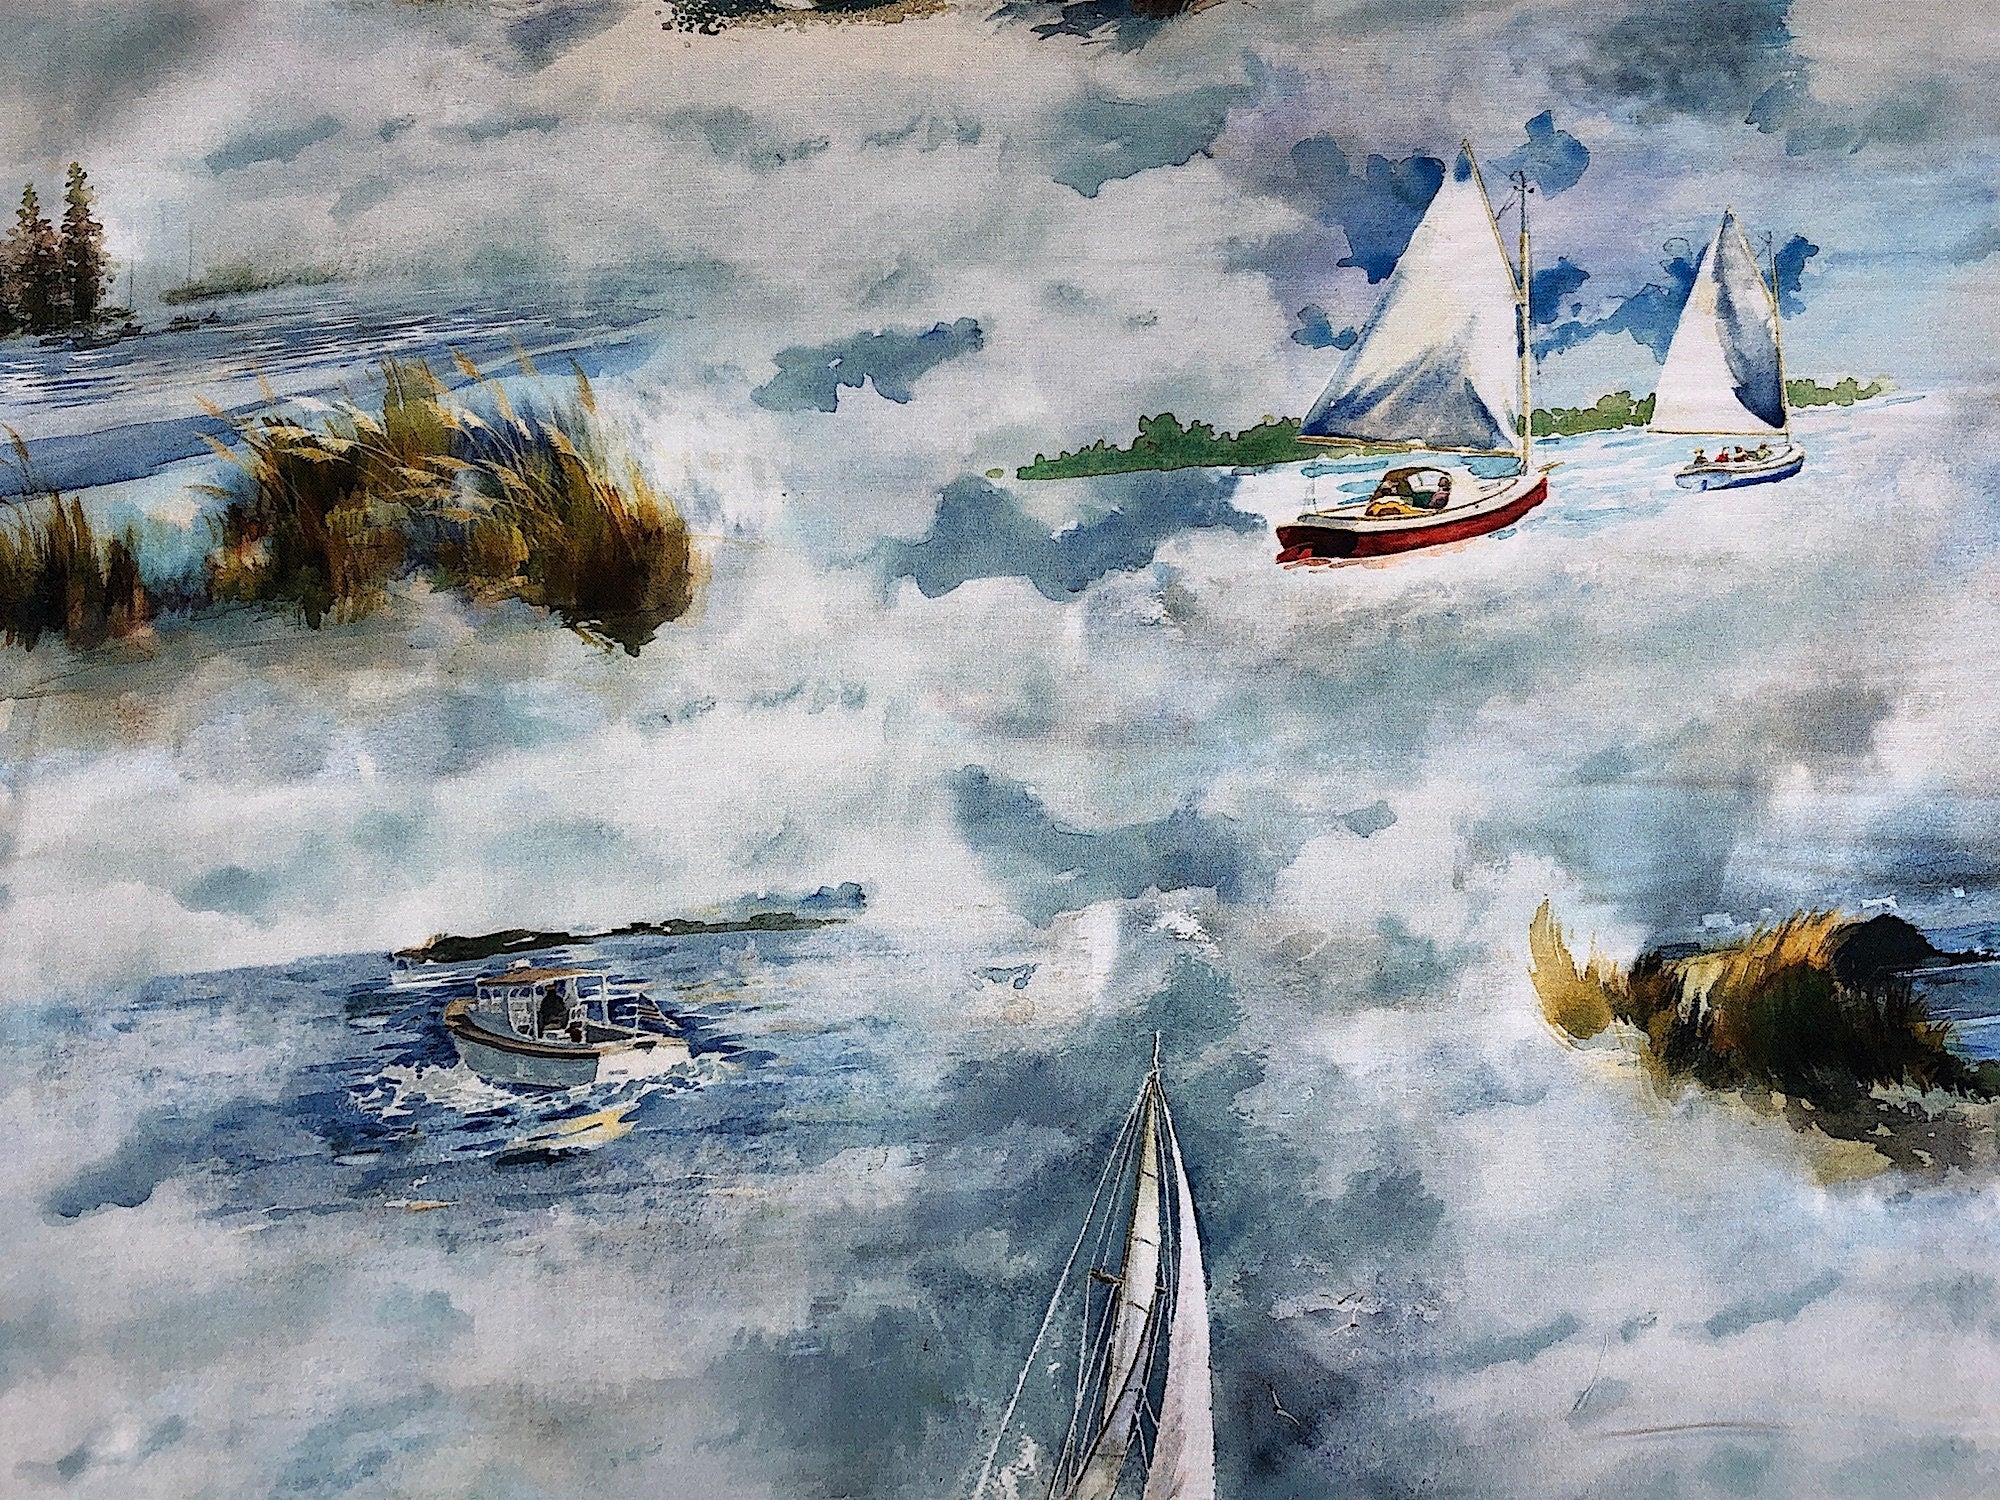 This nautical fabric has a sea scene that has boats, grass, water and clouds.